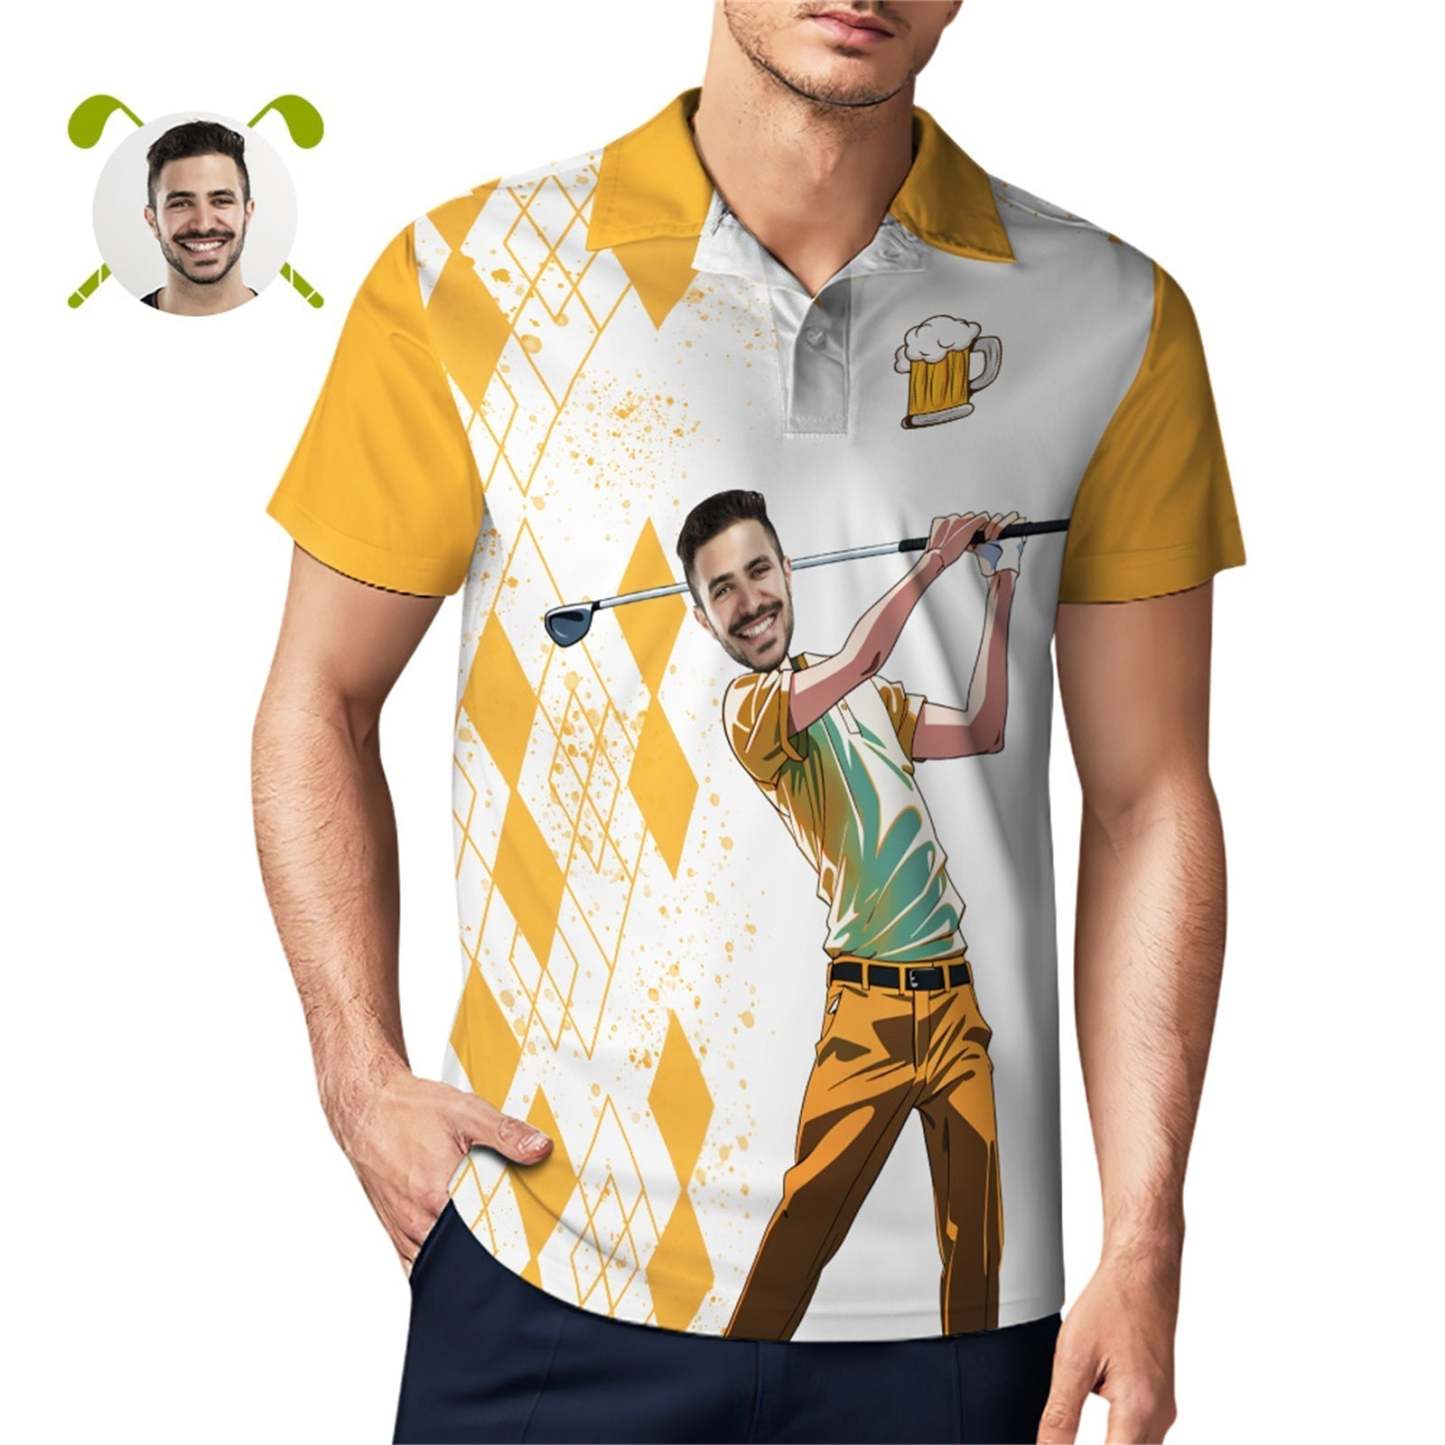 Custom Face Polo Shirt For Men Weekend Forecast Beer And Golf Polo Shirt  For Beer Lovers - MyPhotoBoxerUk